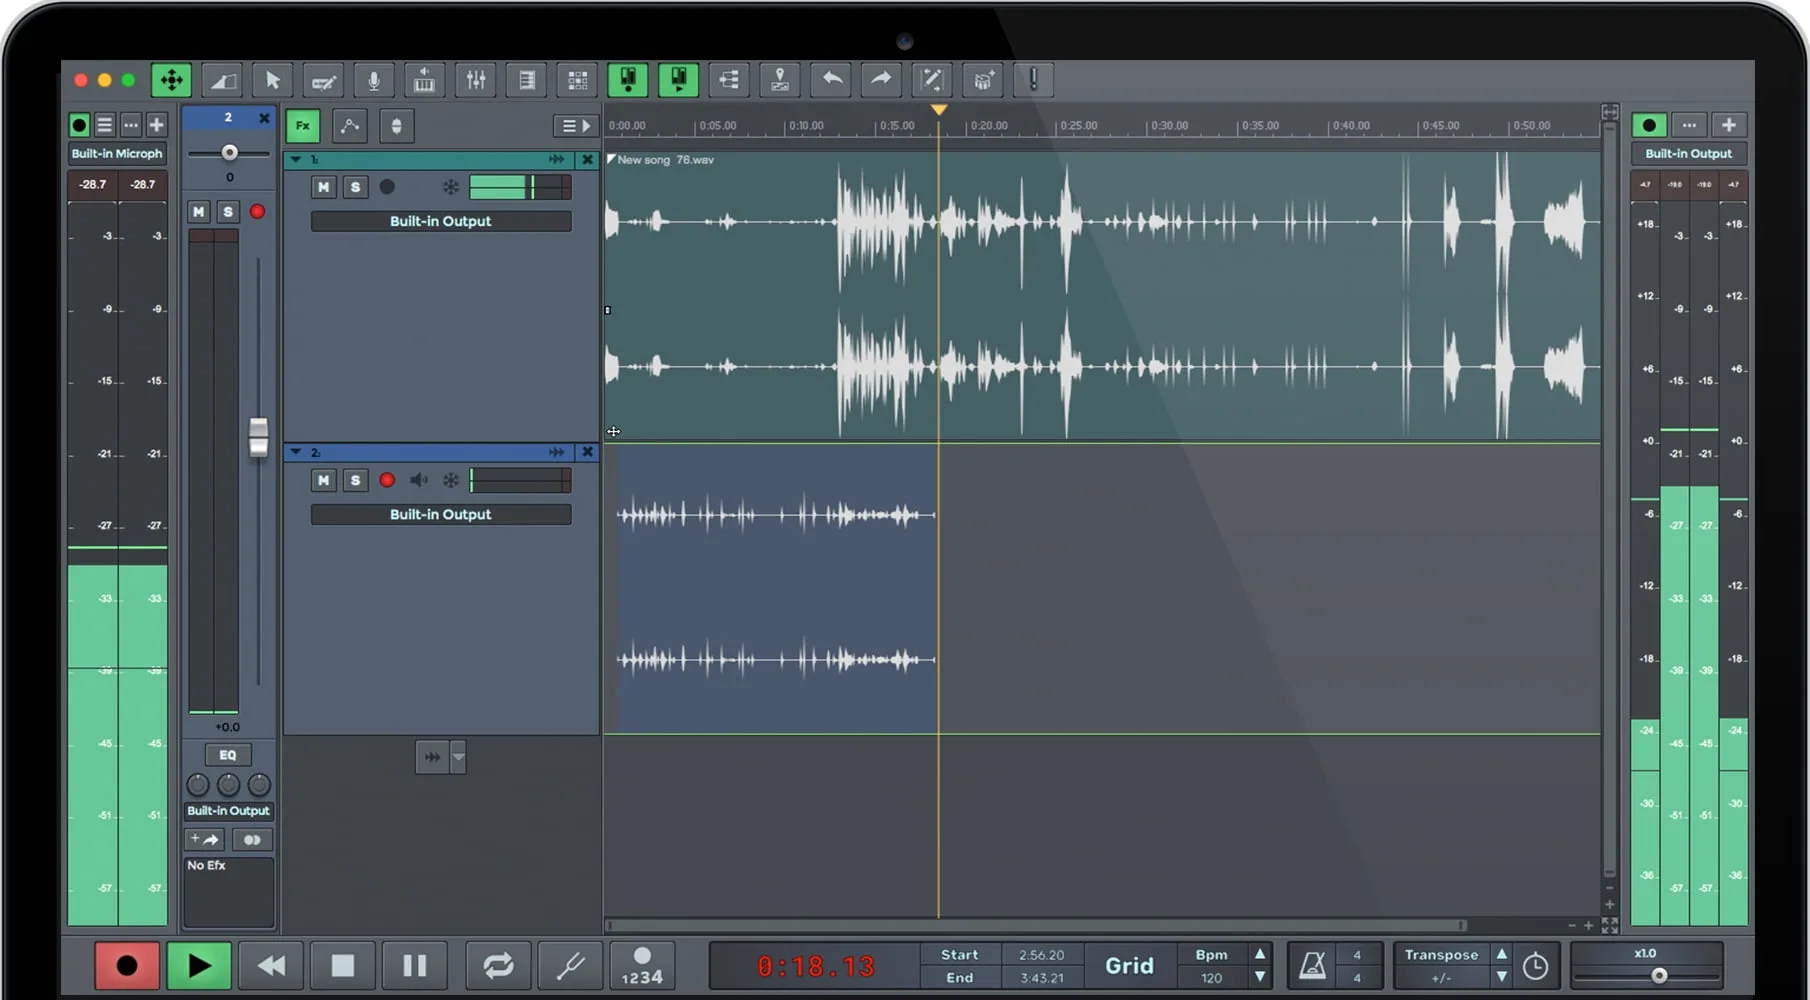 for android download n-Track Studio 9.1.8.6958